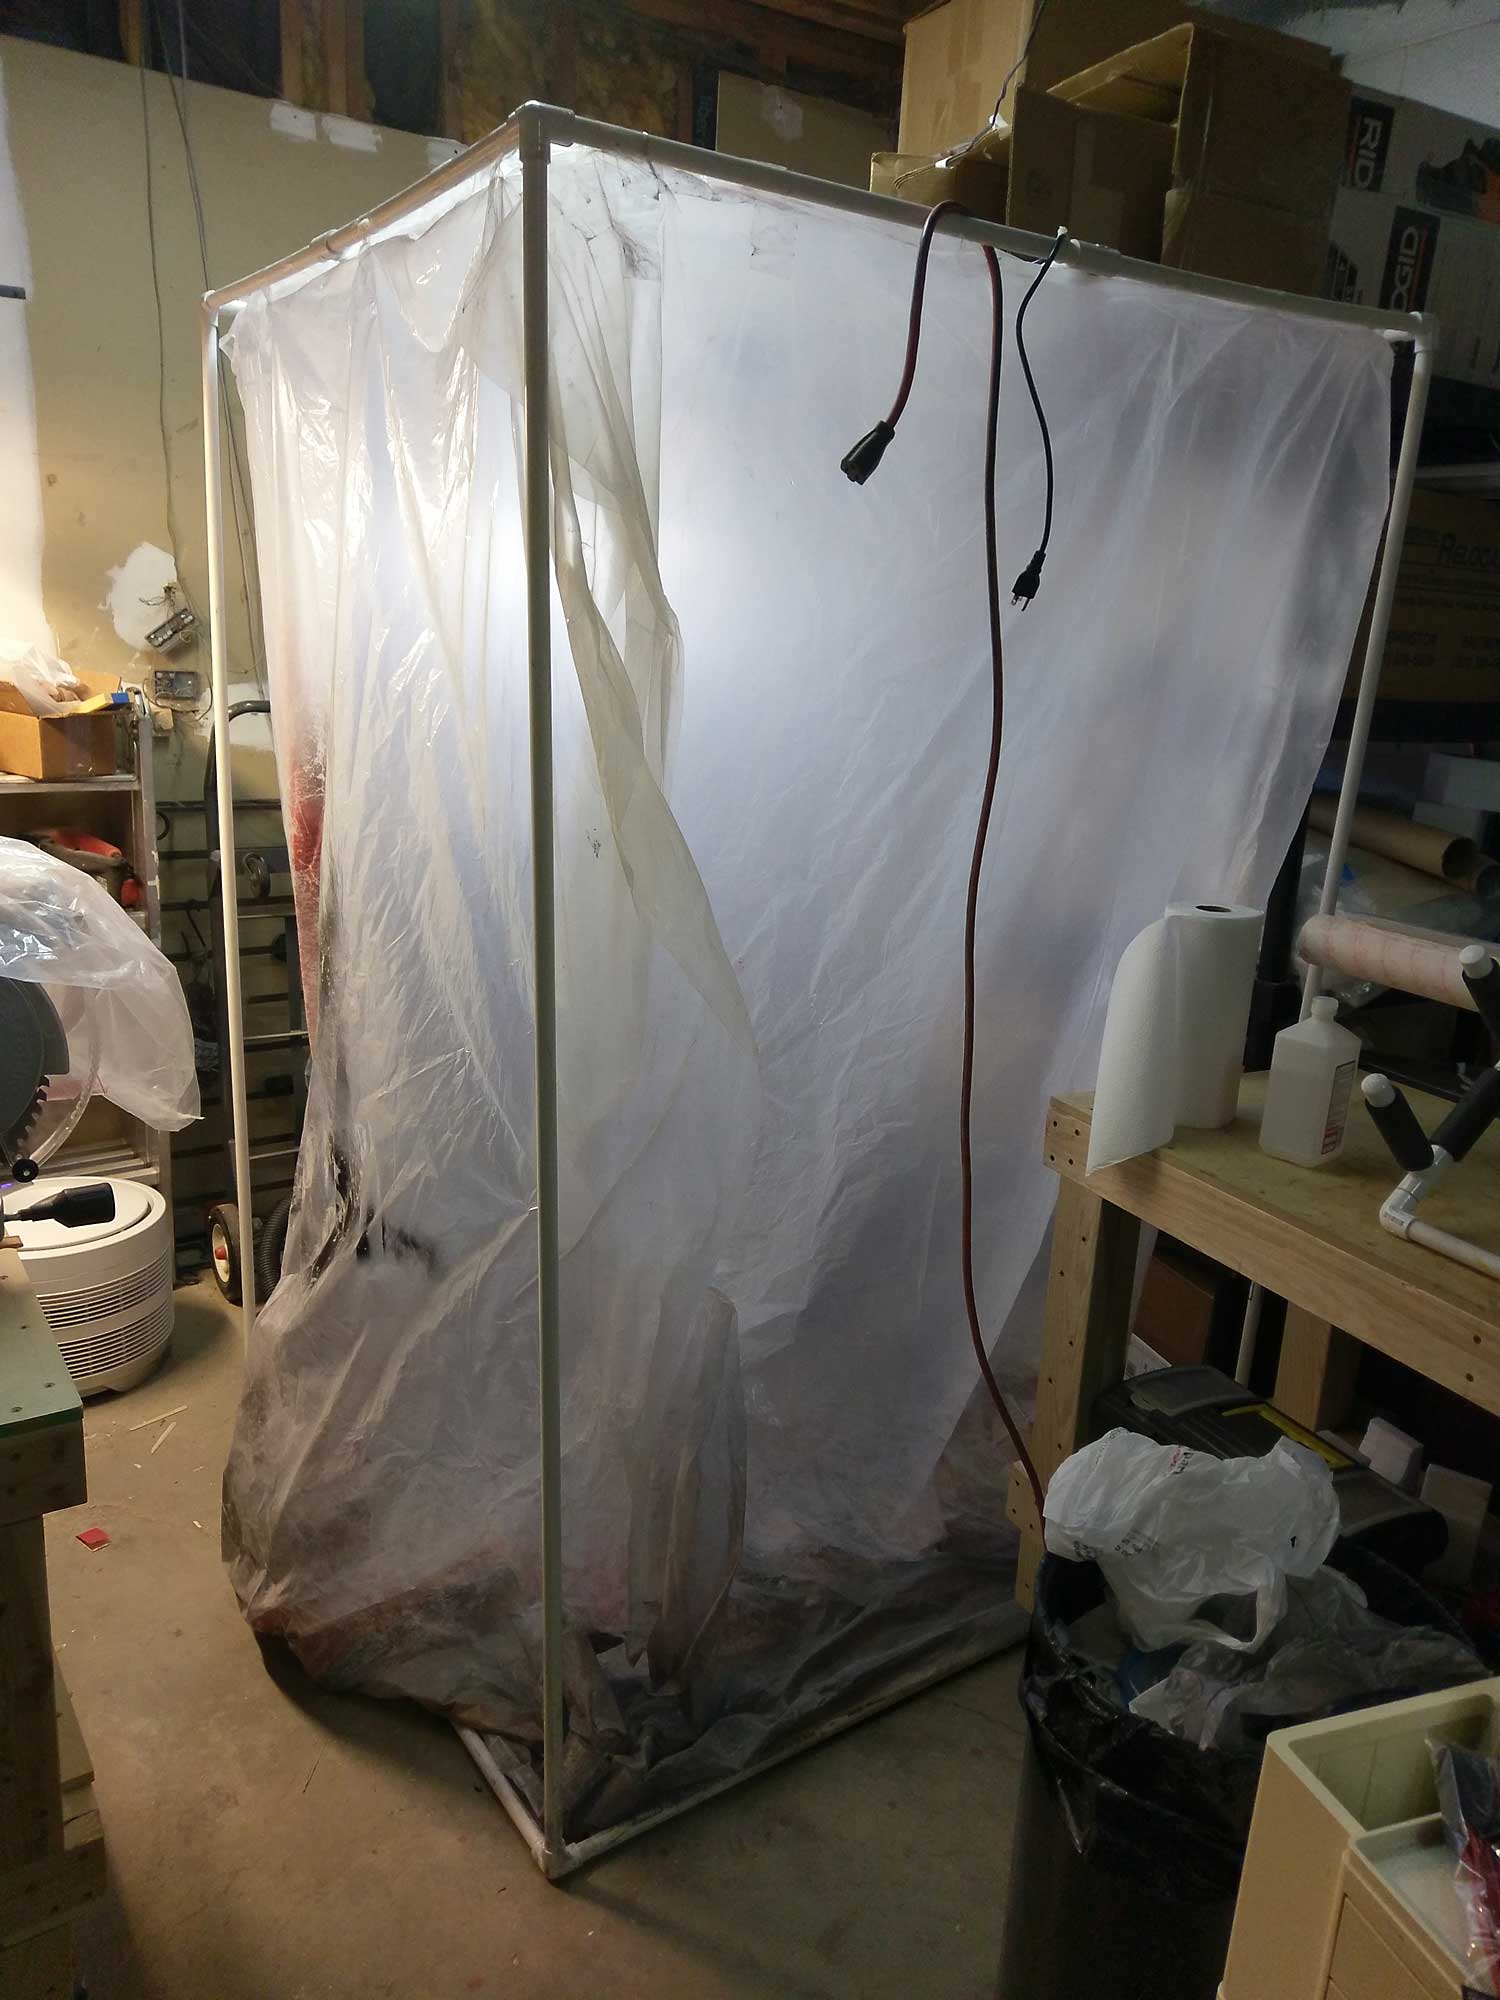 Making a Paint Booth with PVC Pipe and Drop Cloth